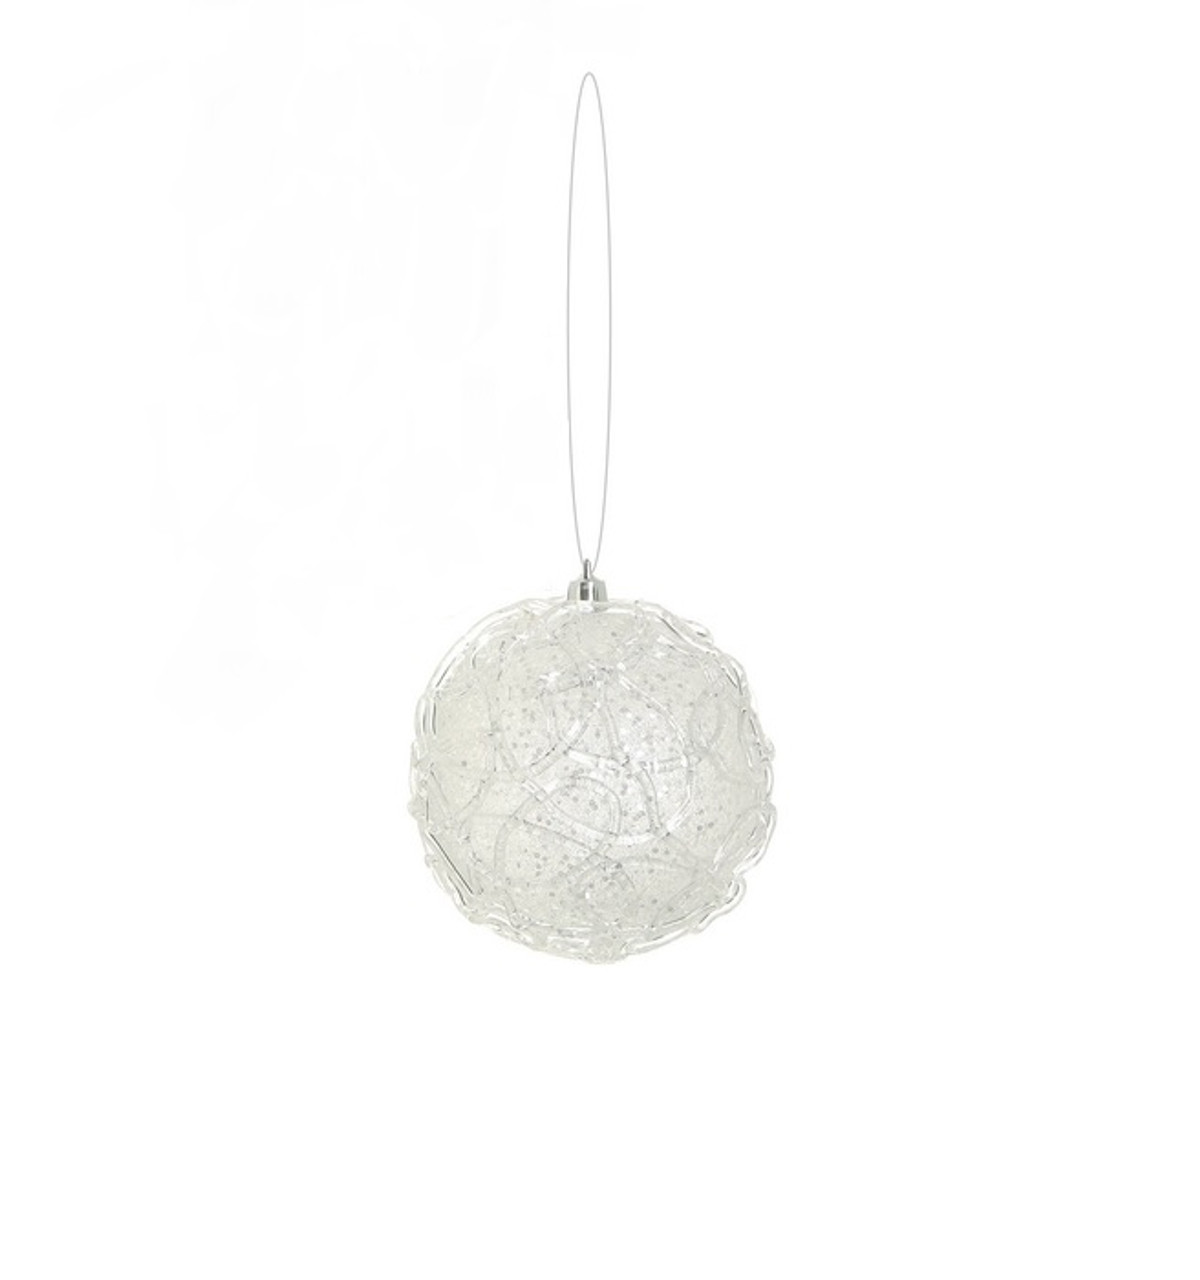 Glittered Clear & Silver Shatterproof Christmas Ball Ornament 4